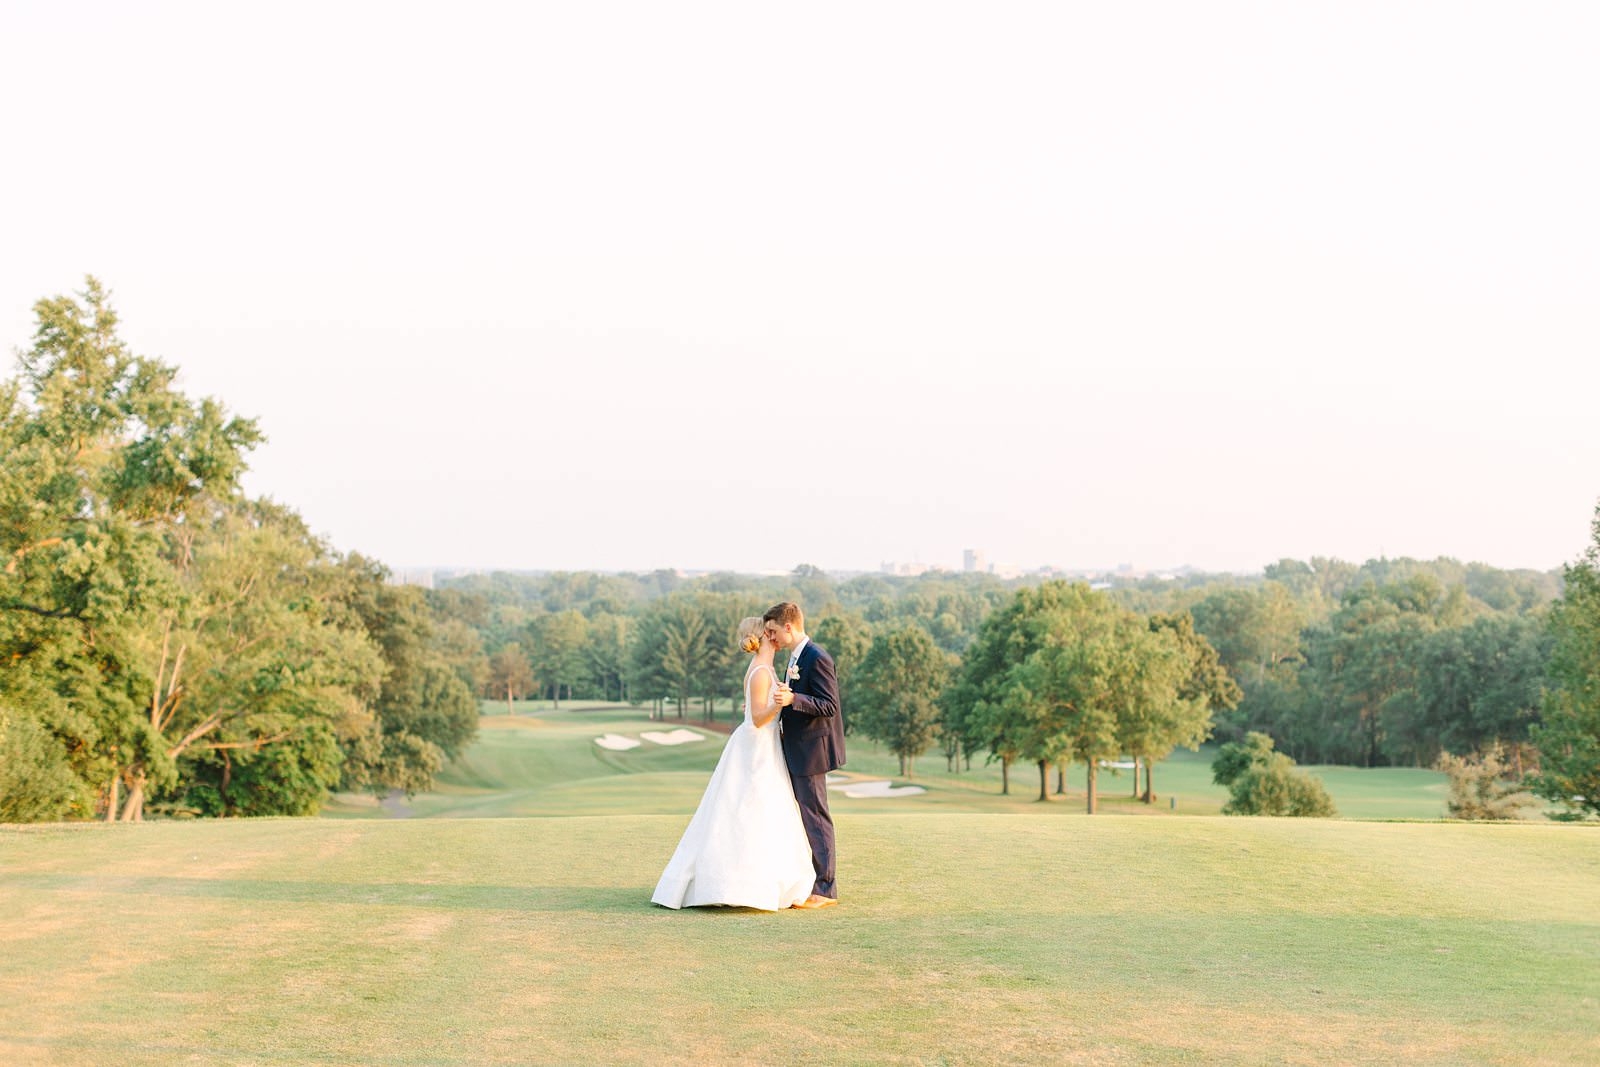 An Evansville Country Club Wedding | Ashley and Beau | Bret and Brandie Photography227.jpg